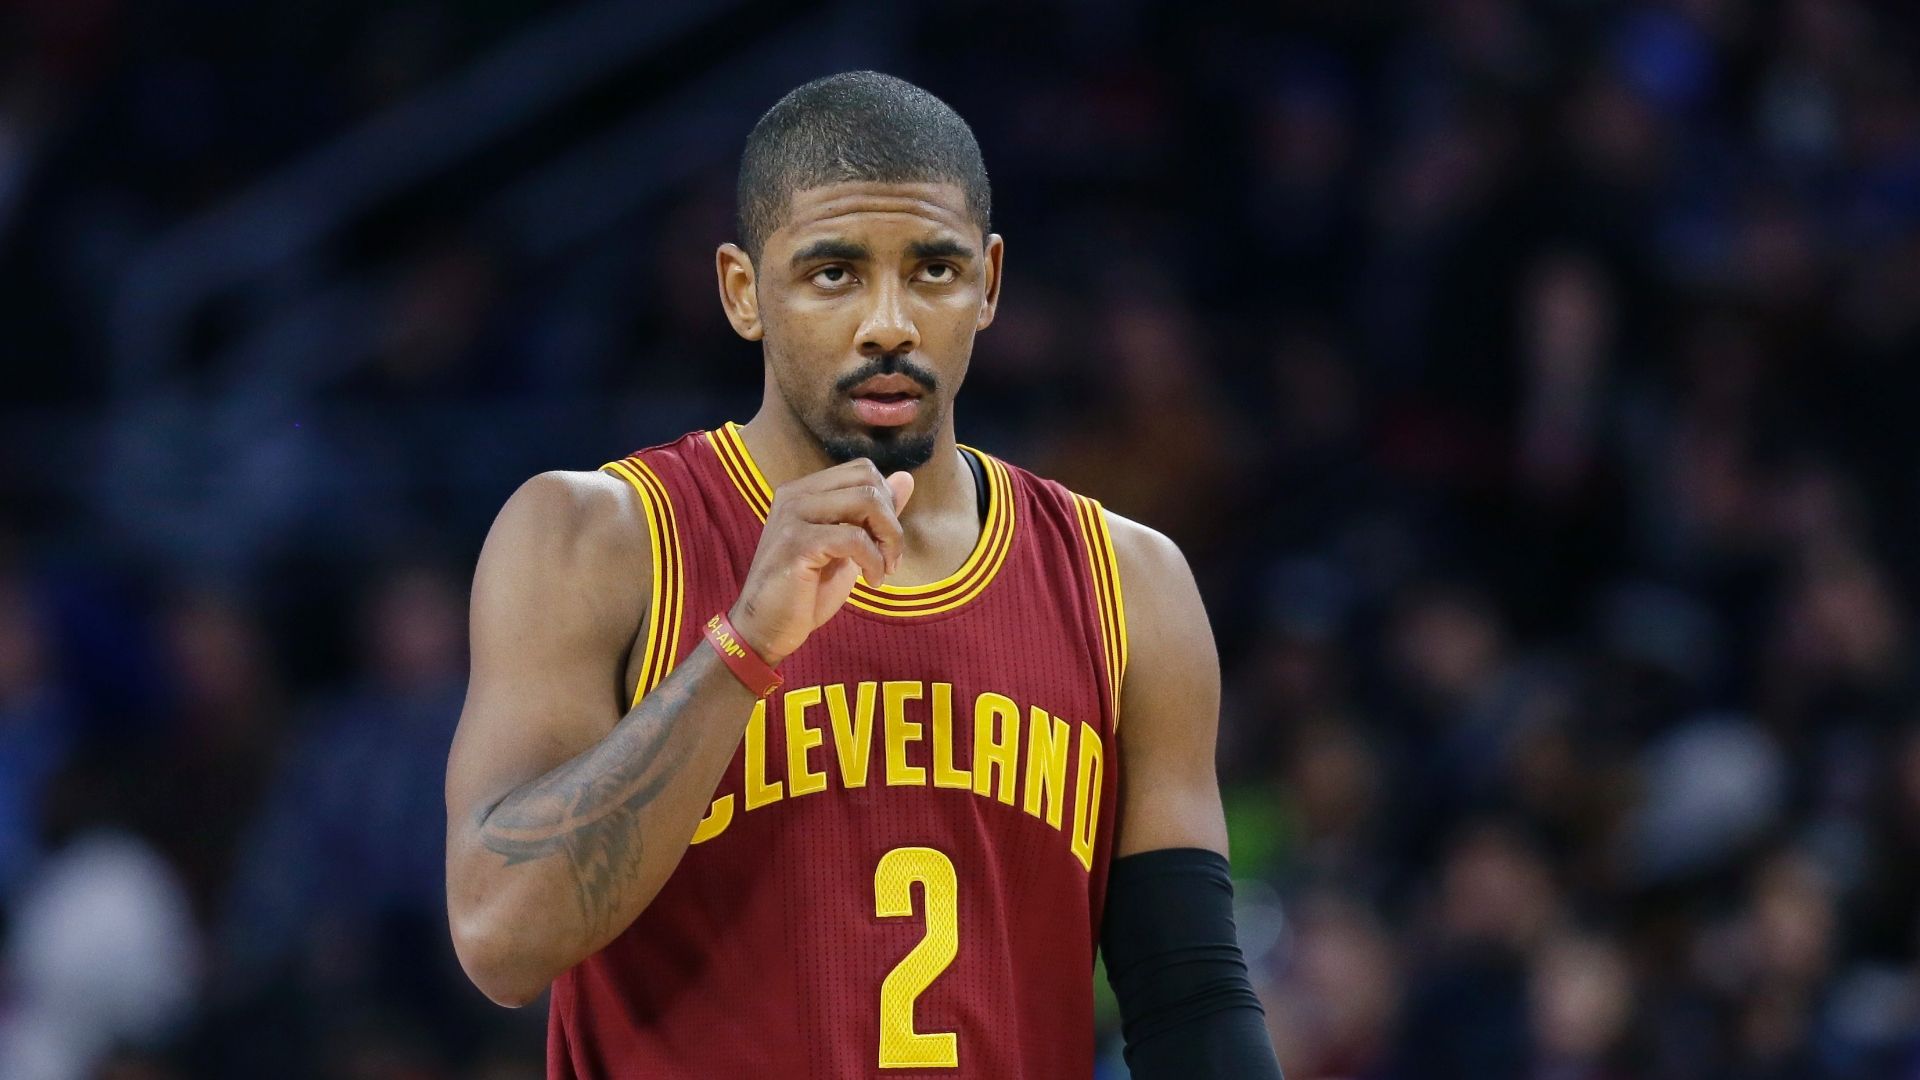 Cavaliers' Kyrie Irving gets apology after being bitten by bed bugs